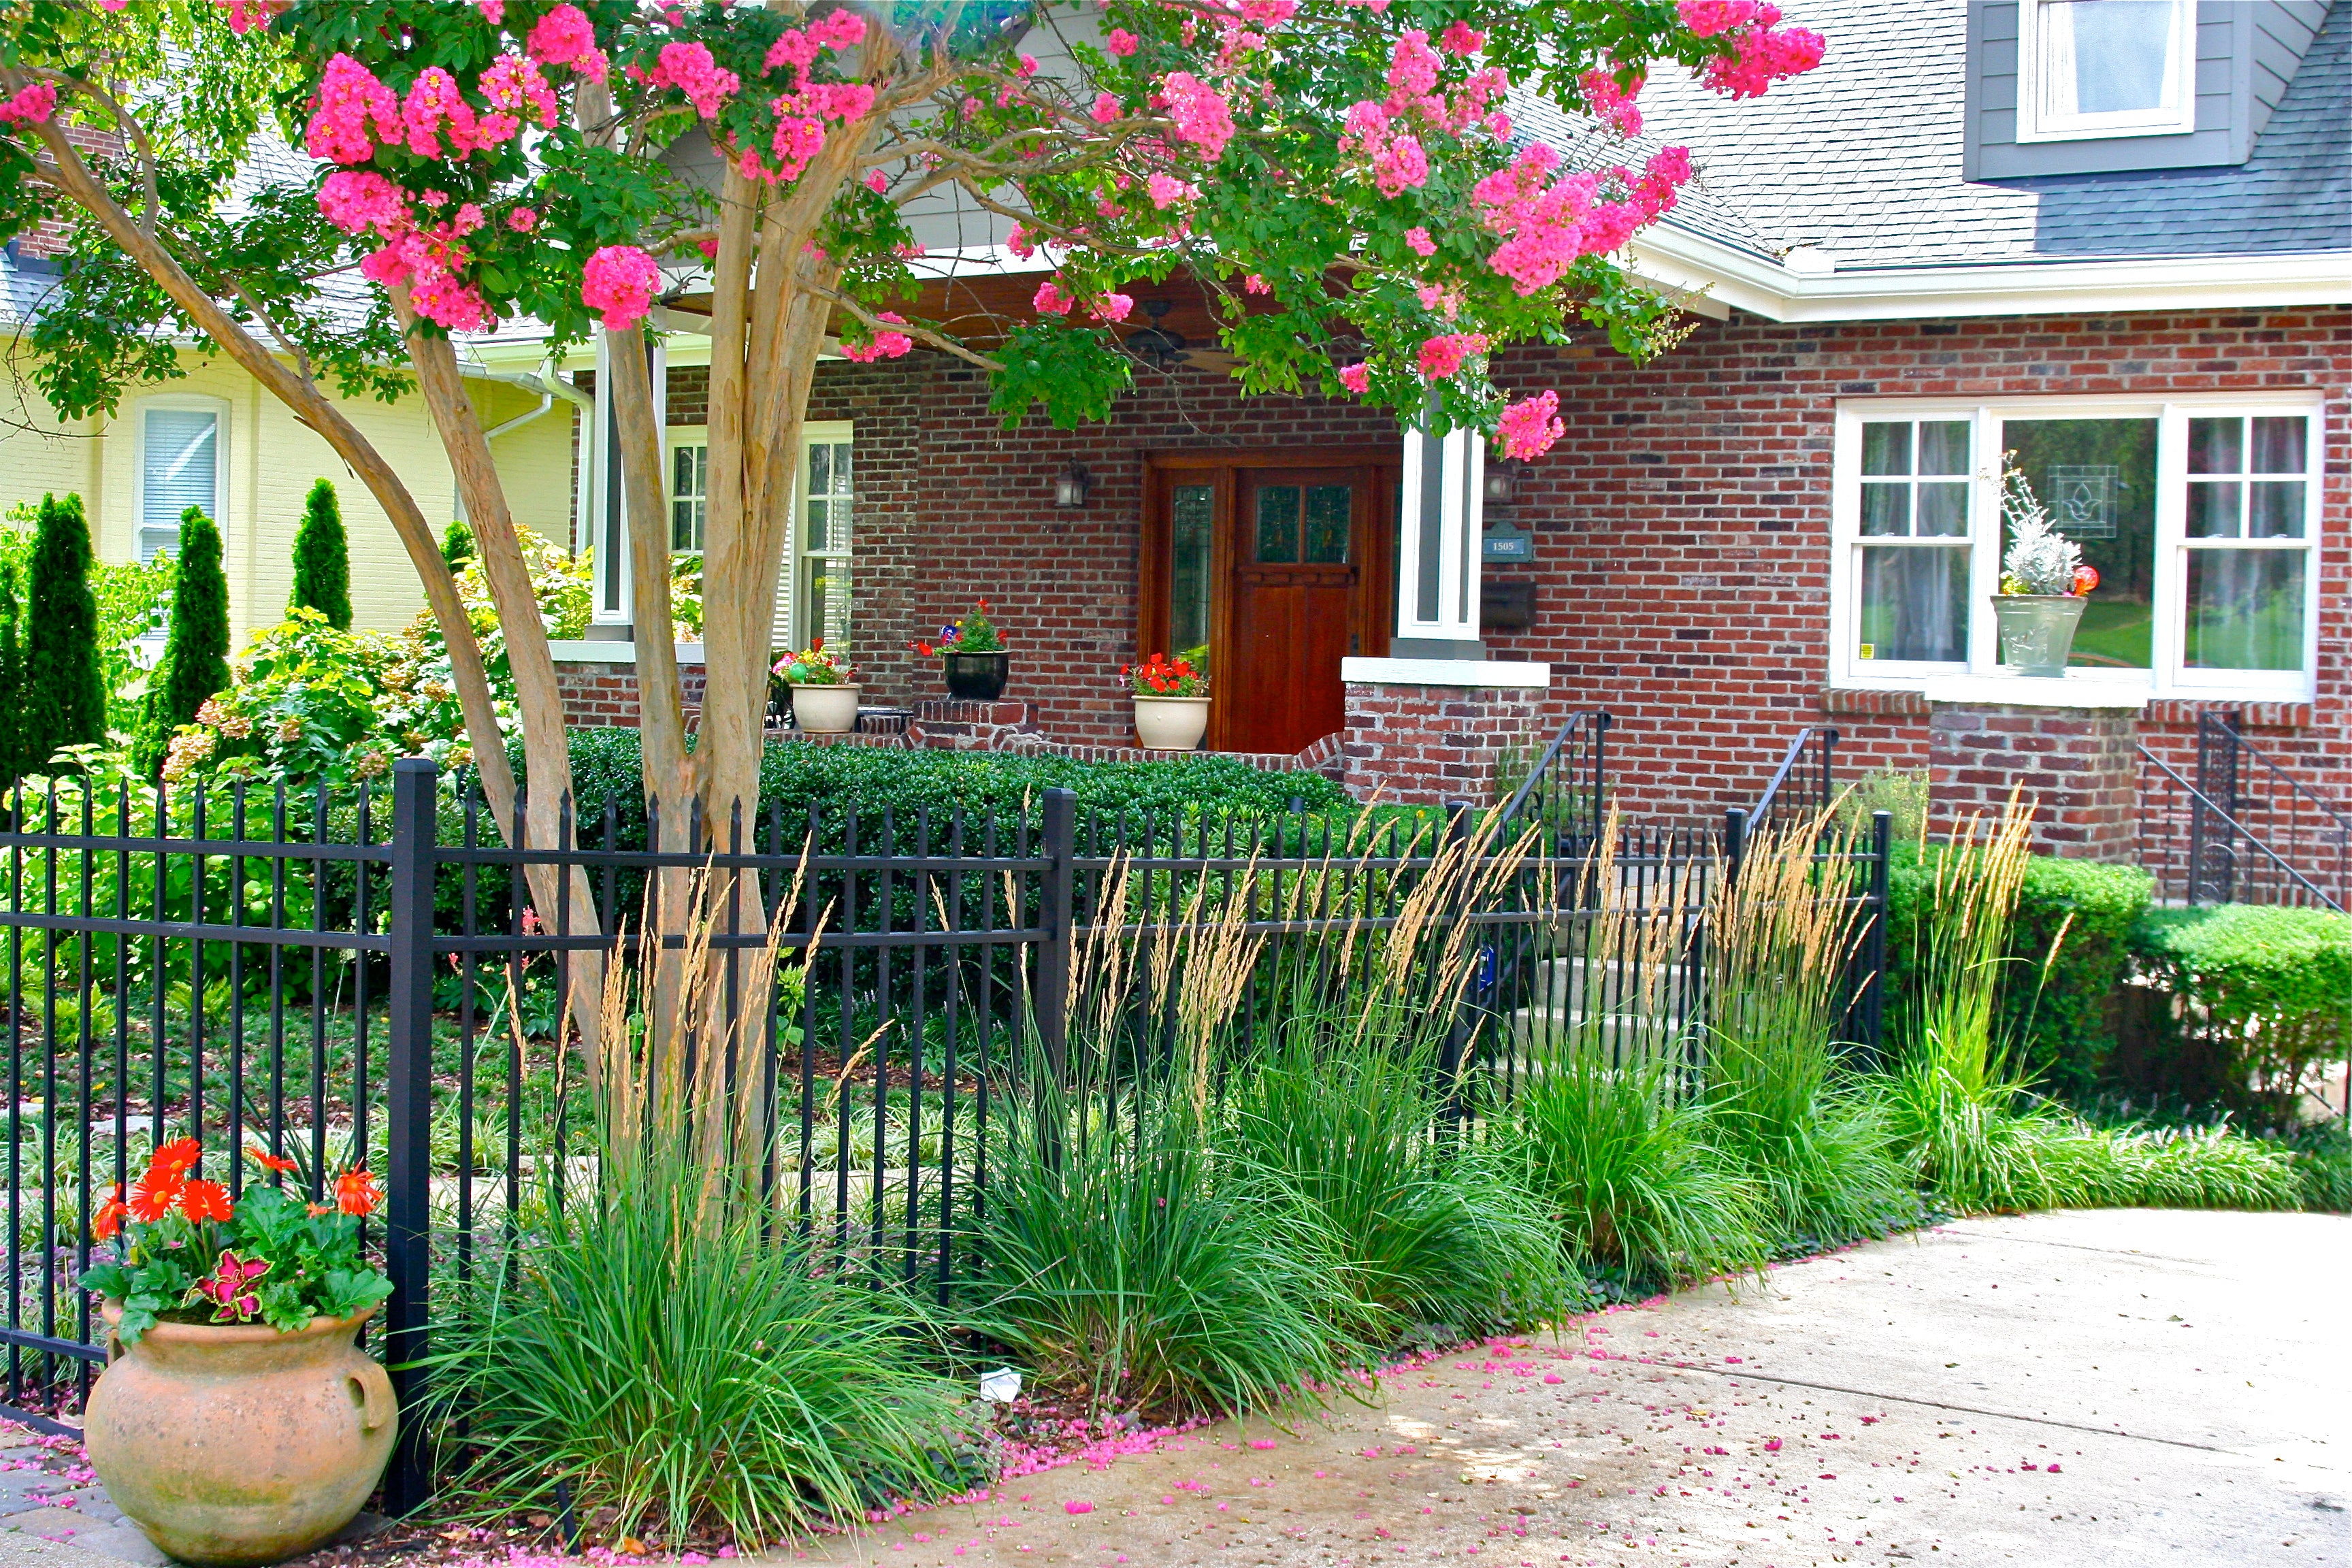 How To Improve Property Values Through Diy Landscaping Gardens